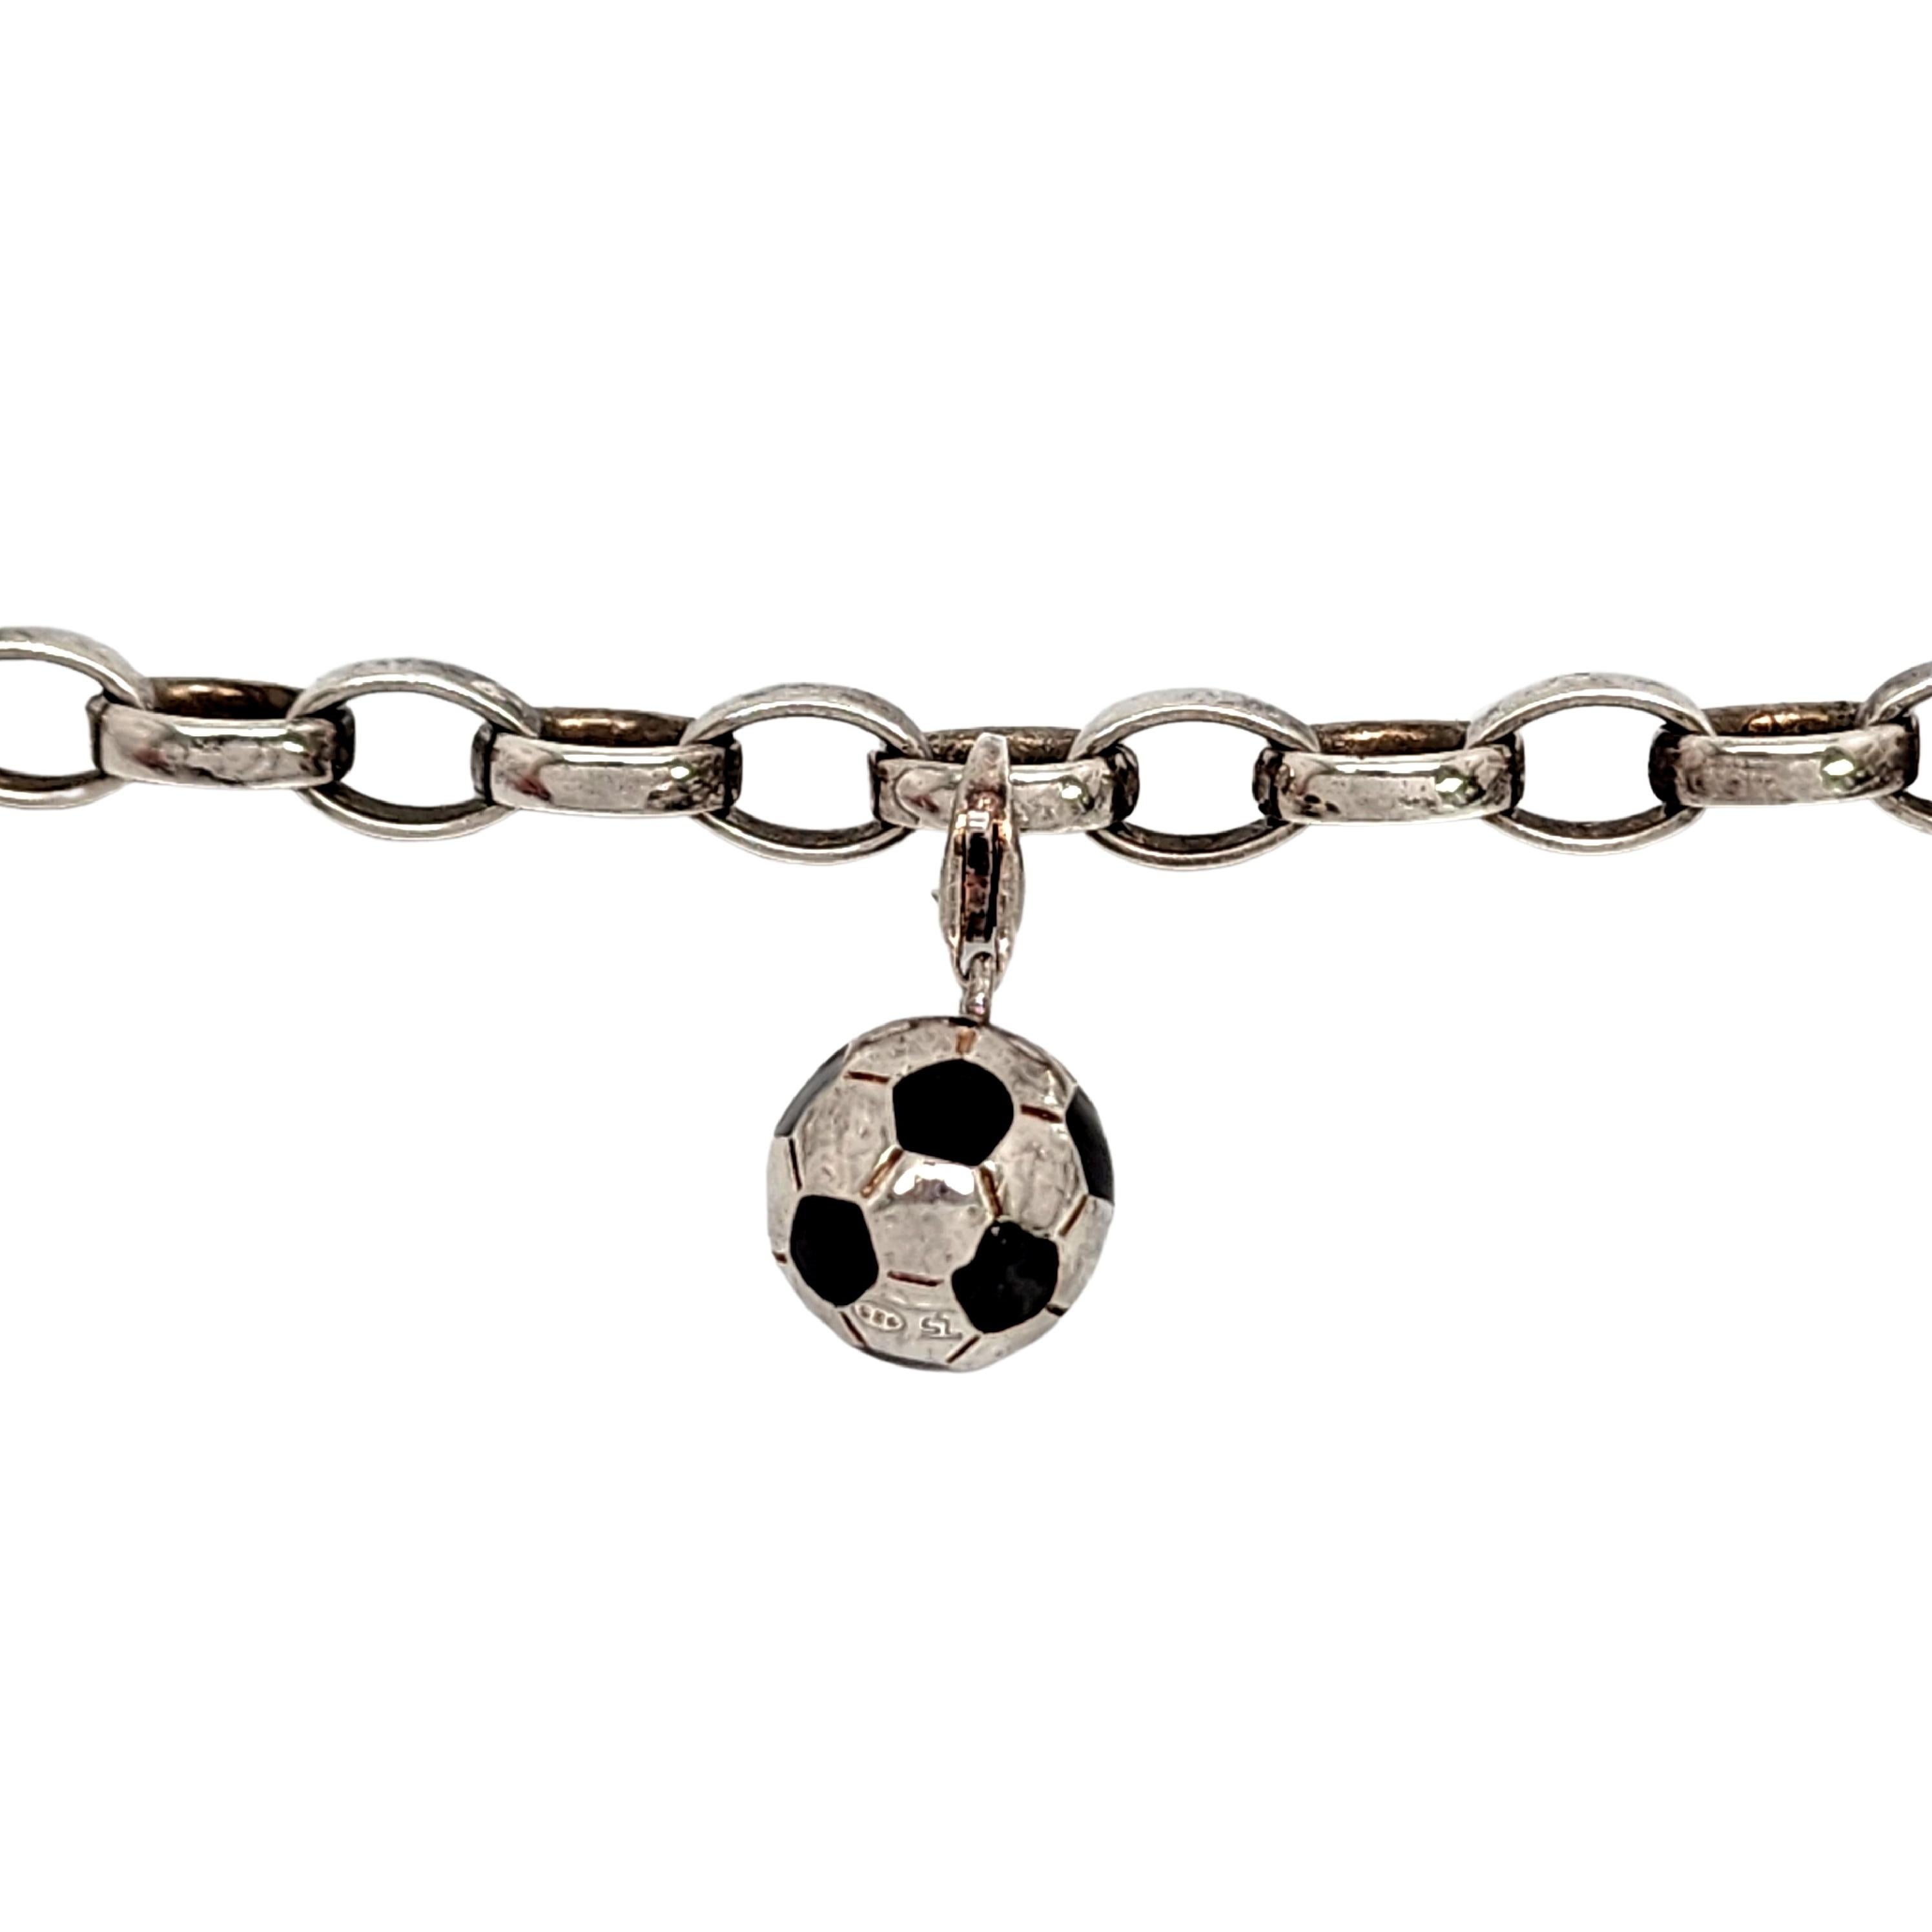 Thomas Sabo Charm Club SS Bracelet with Soccer Ball and Leaf Charms #14459 In Good Condition For Sale In Washington Depot, CT